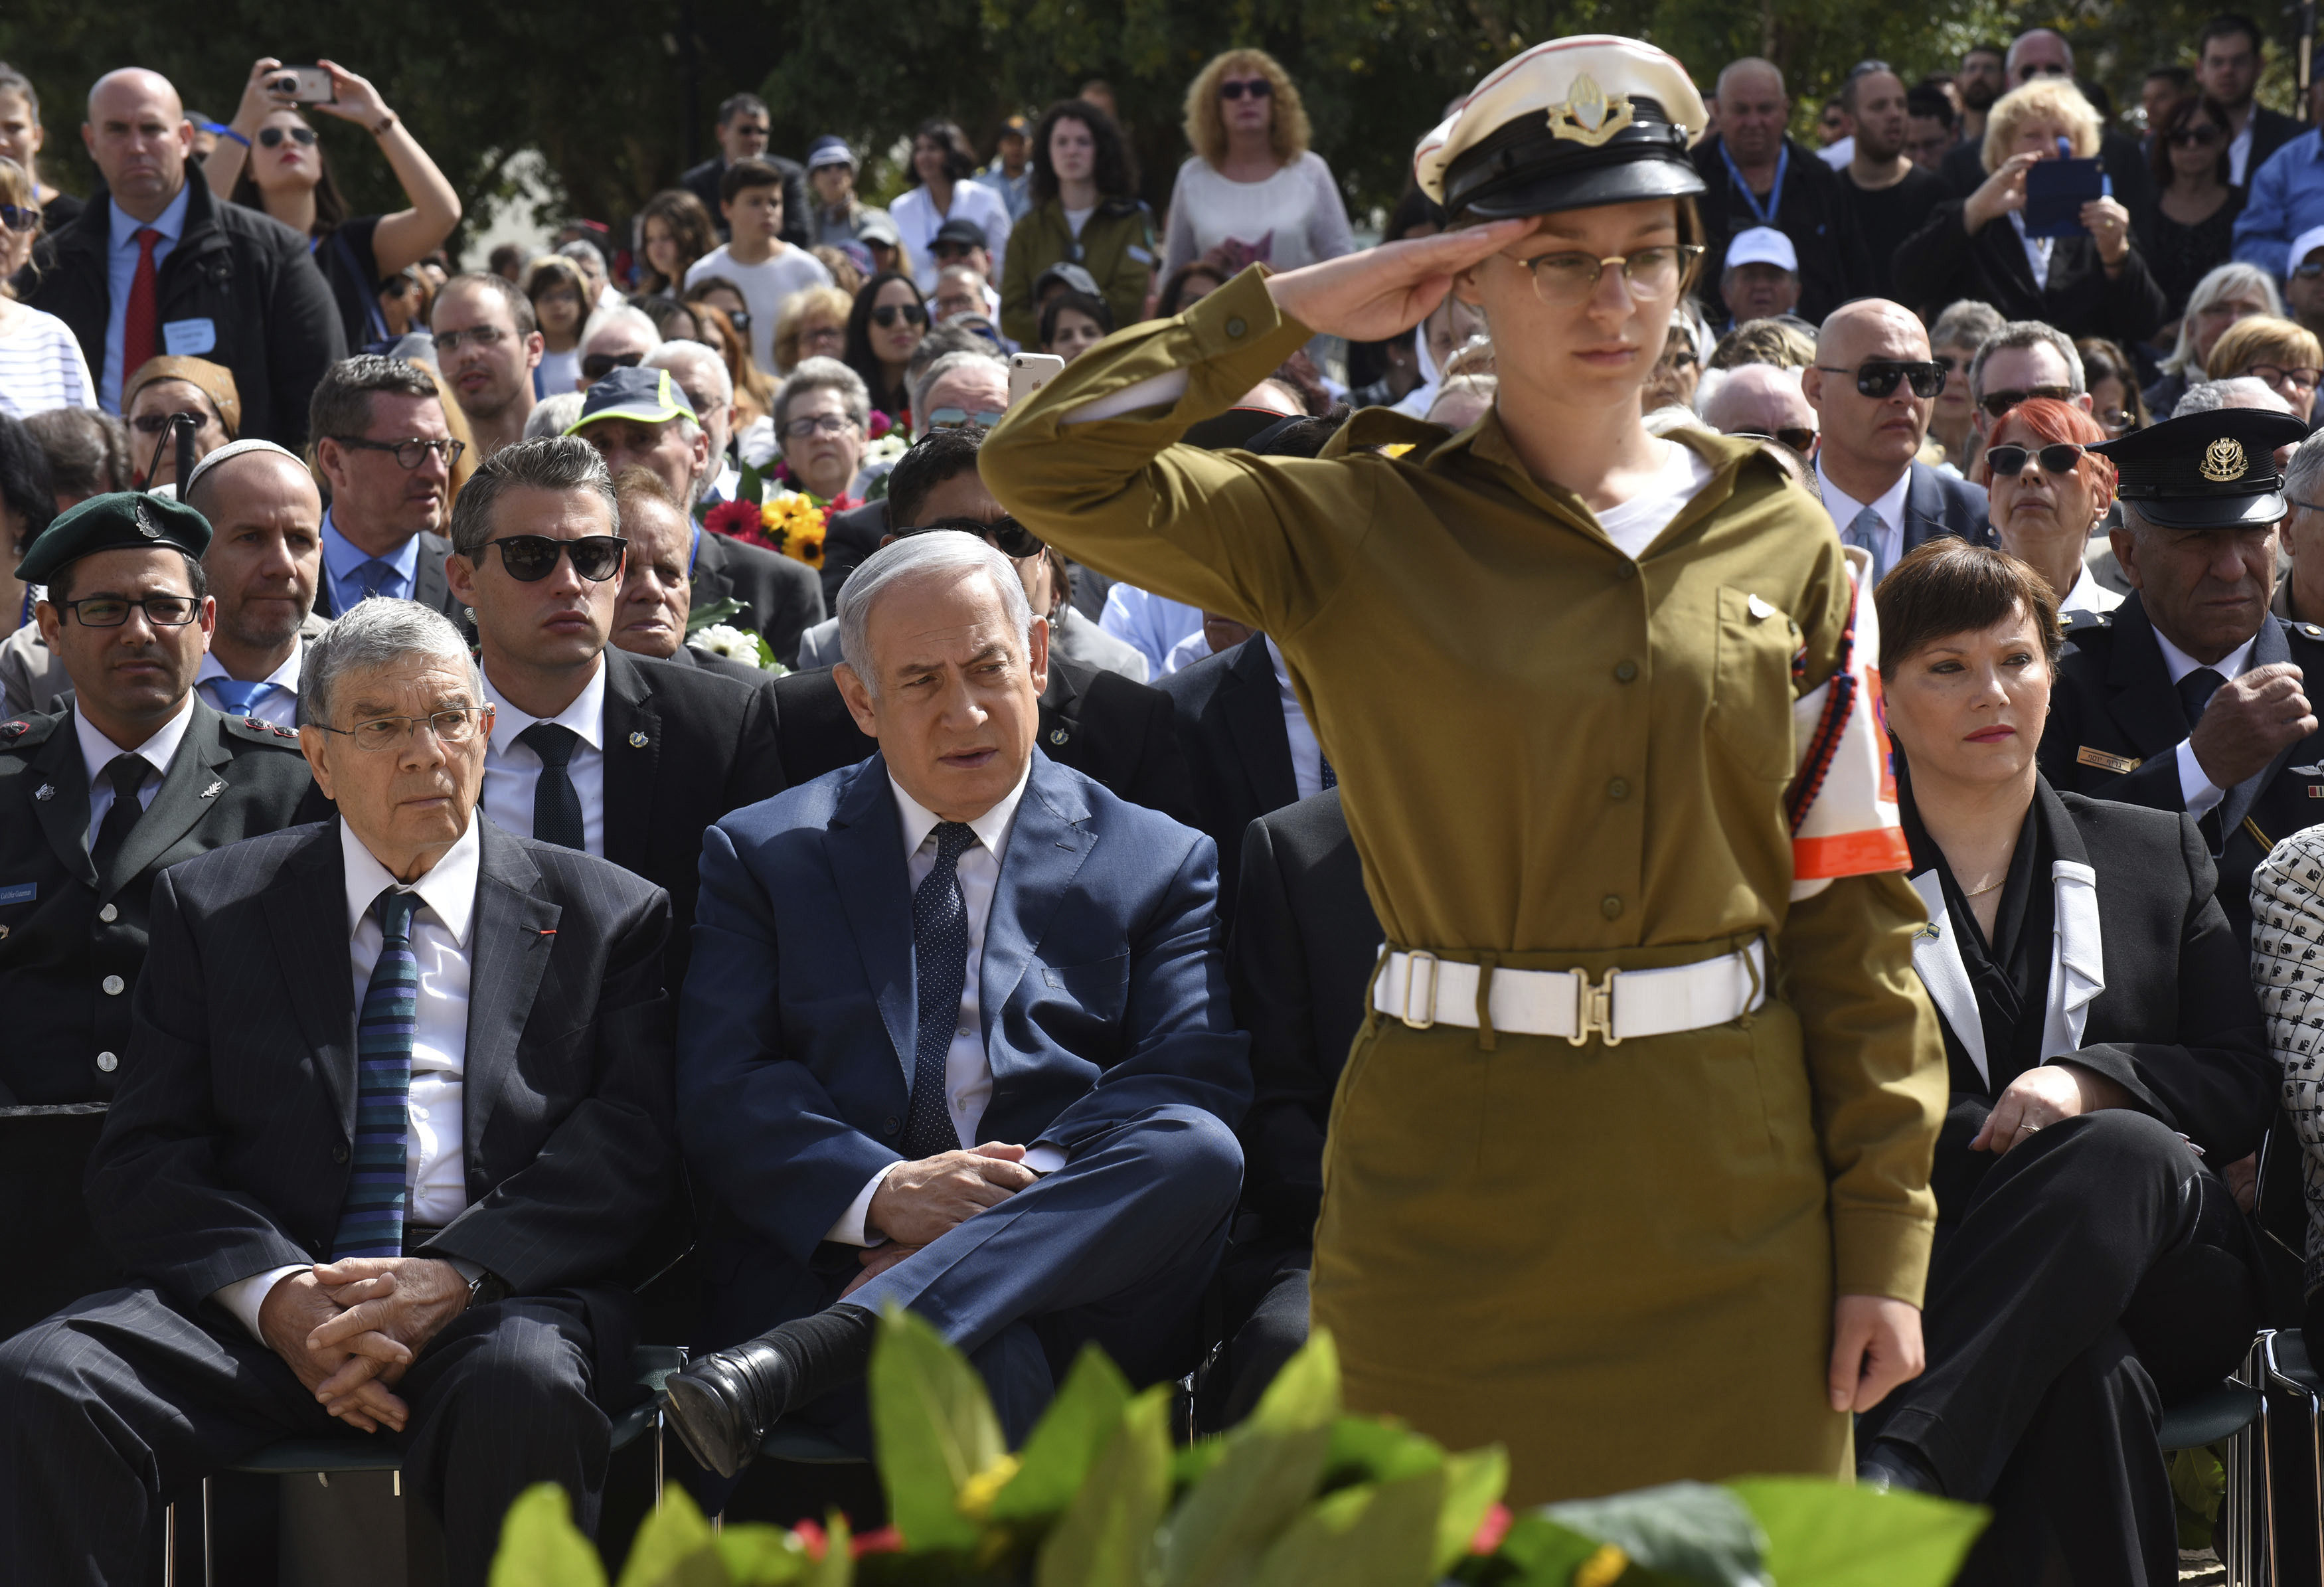 Benjamin Netanyahu attends a ceremony marking the annual Holocaust Remembrance Day at Yad Vashem Holocaust Memorial in Jerusalem (Debbie Hill/Pool via AP)